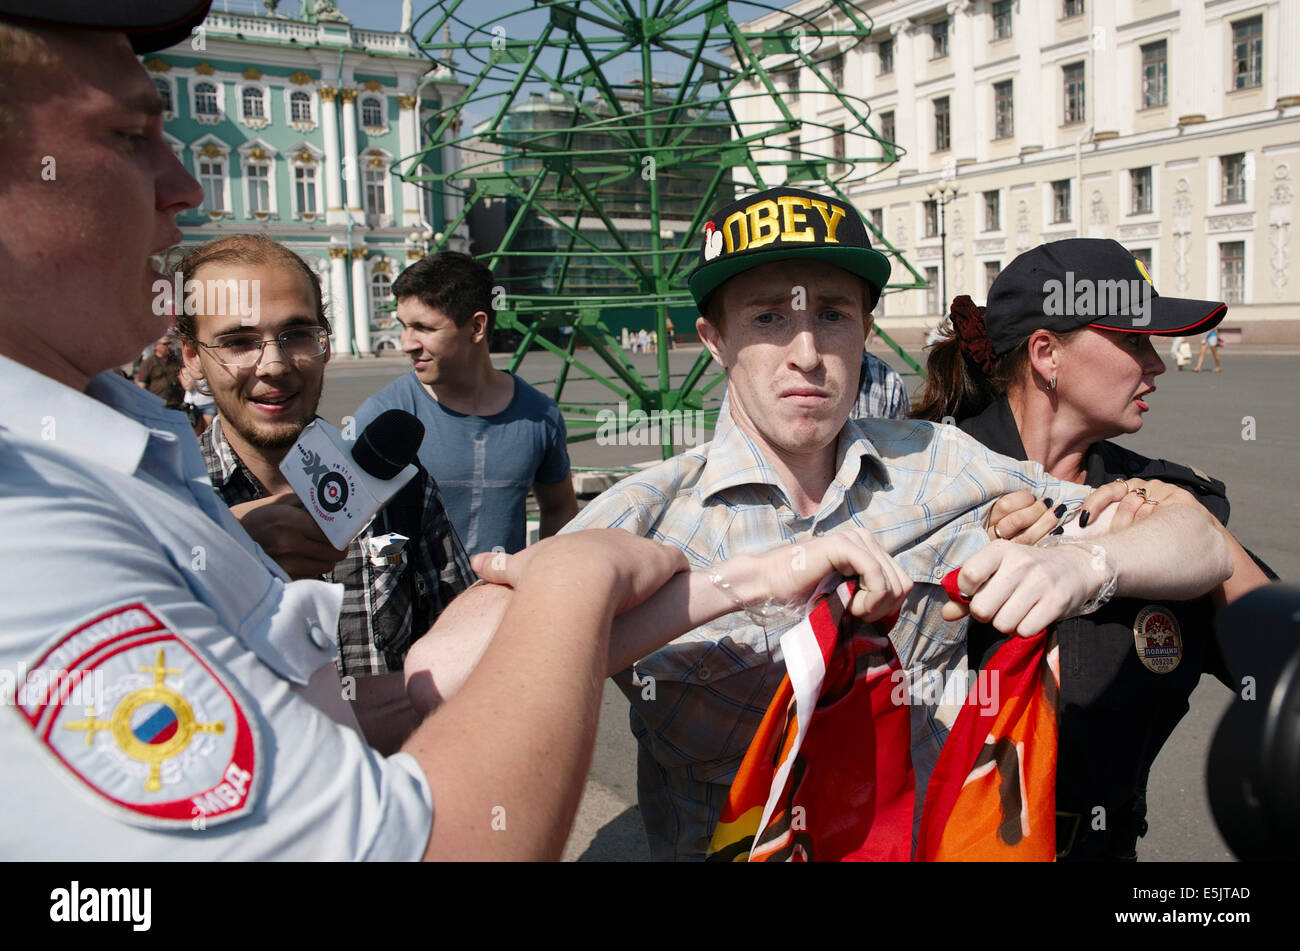 St Petersburg, Russia. 2nd Aug, 2014. LGBT gay activist KIRILL KALUGIN is arrested by police during a one-man protest in Palace Square. Credit:  Denis Tarasov/ZUMA Wire/ZUMAPRESS.com/Alamy Live News Stock Photo